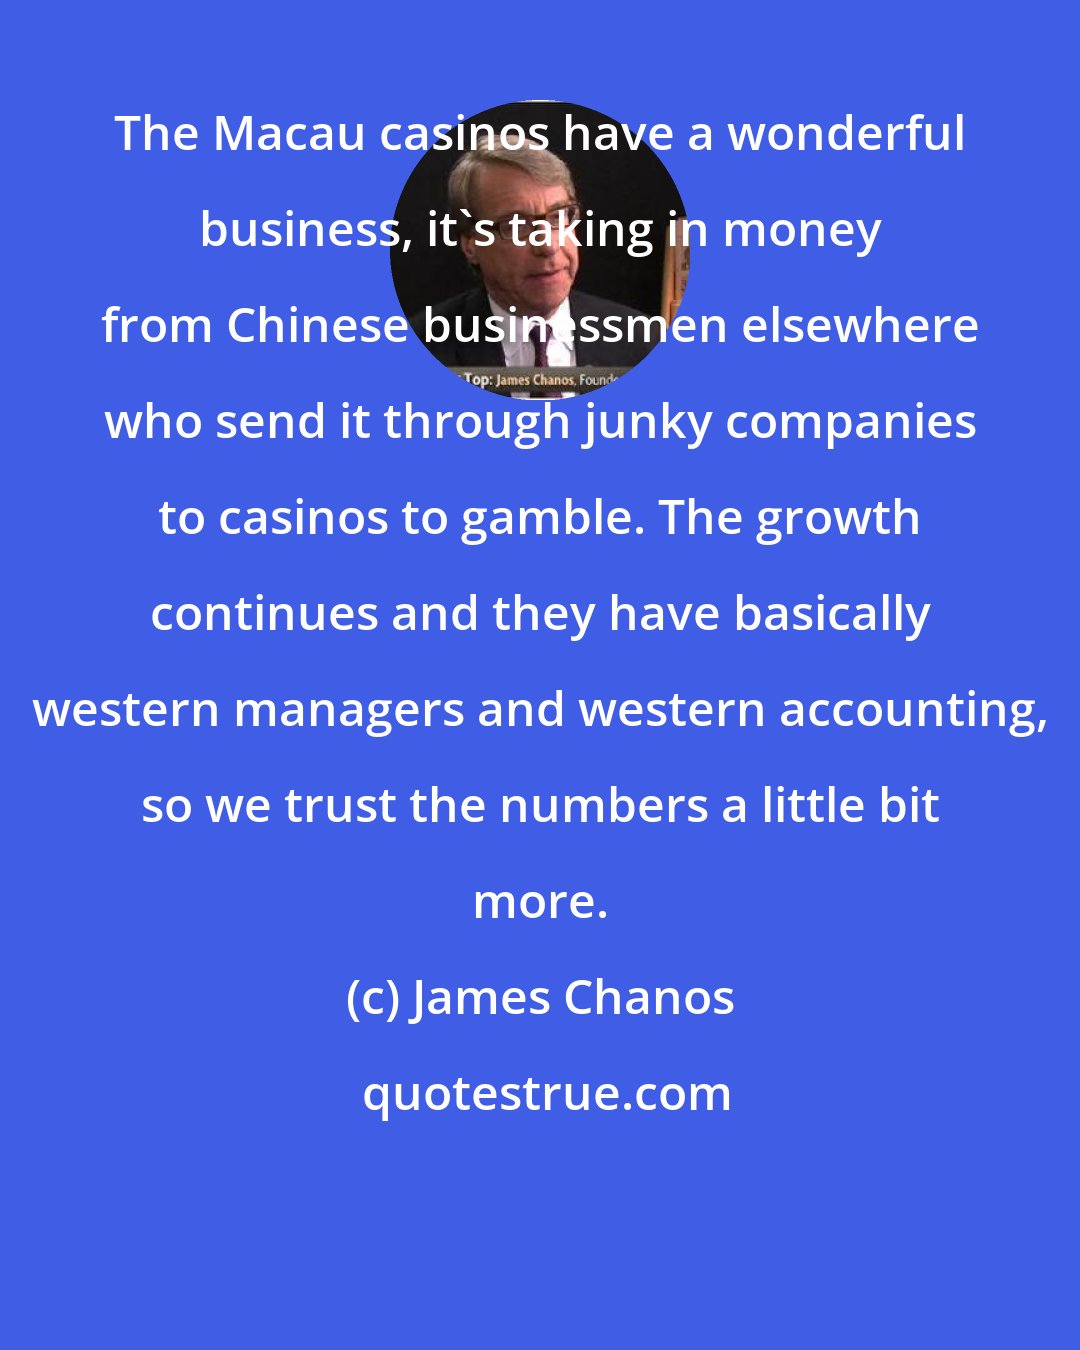 James Chanos: The Macau casinos have a wonderful business, it's taking in money from Chinese businessmen elsewhere who send it through junky companies to casinos to gamble. The growth continues and they have basically western managers and western accounting, so we trust the numbers a little bit more.